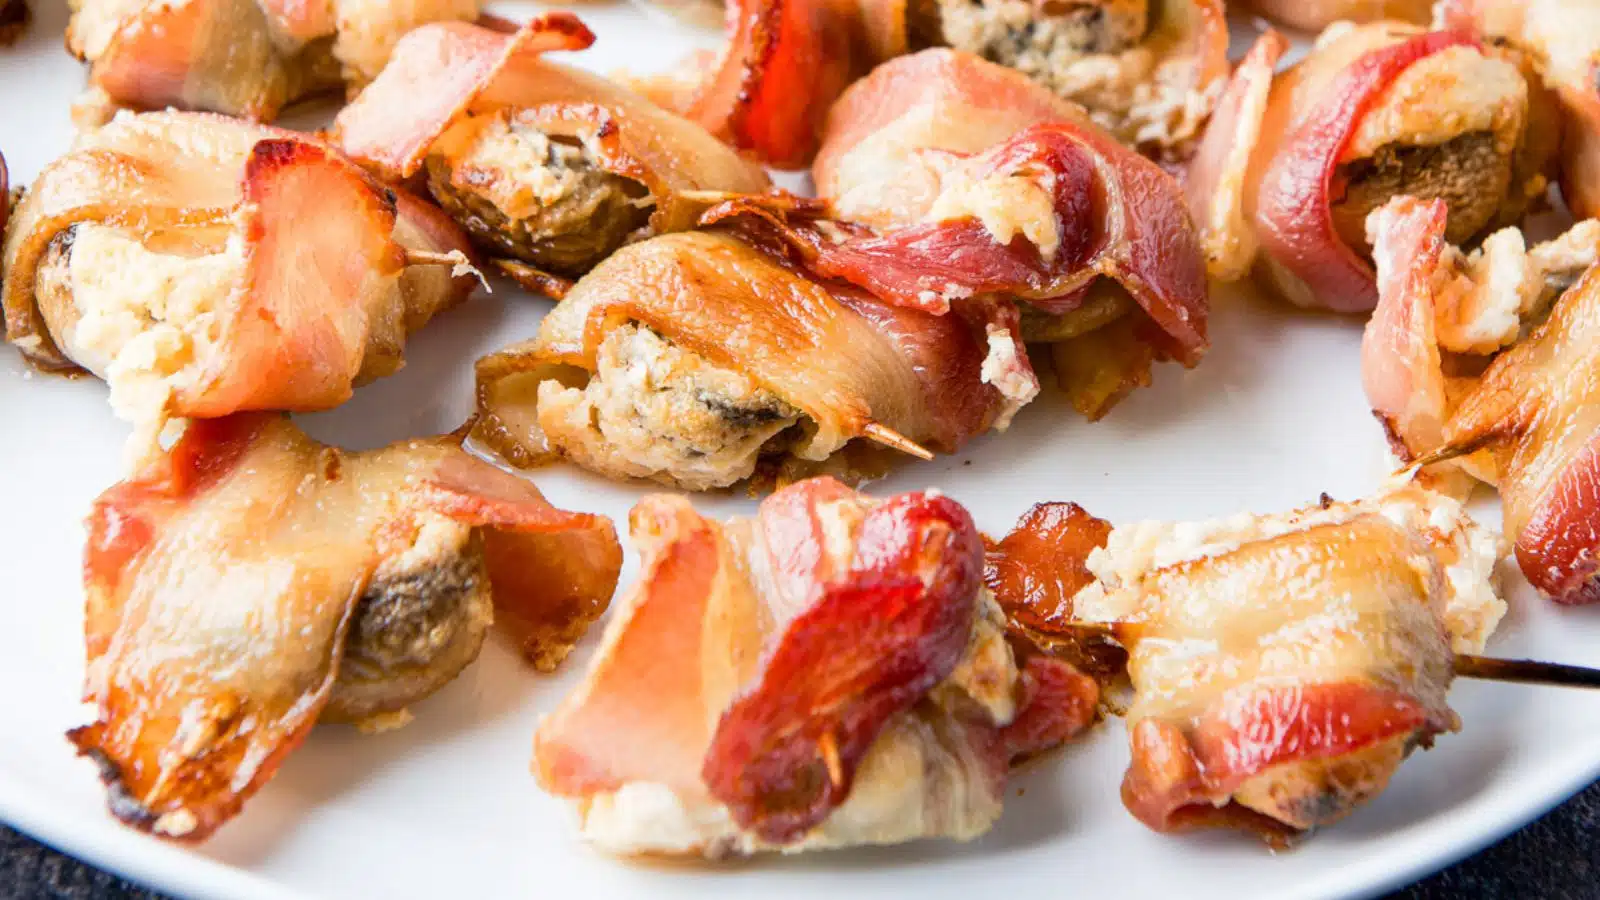 A white plate with bacon wrapped around a stuffed mushrooms